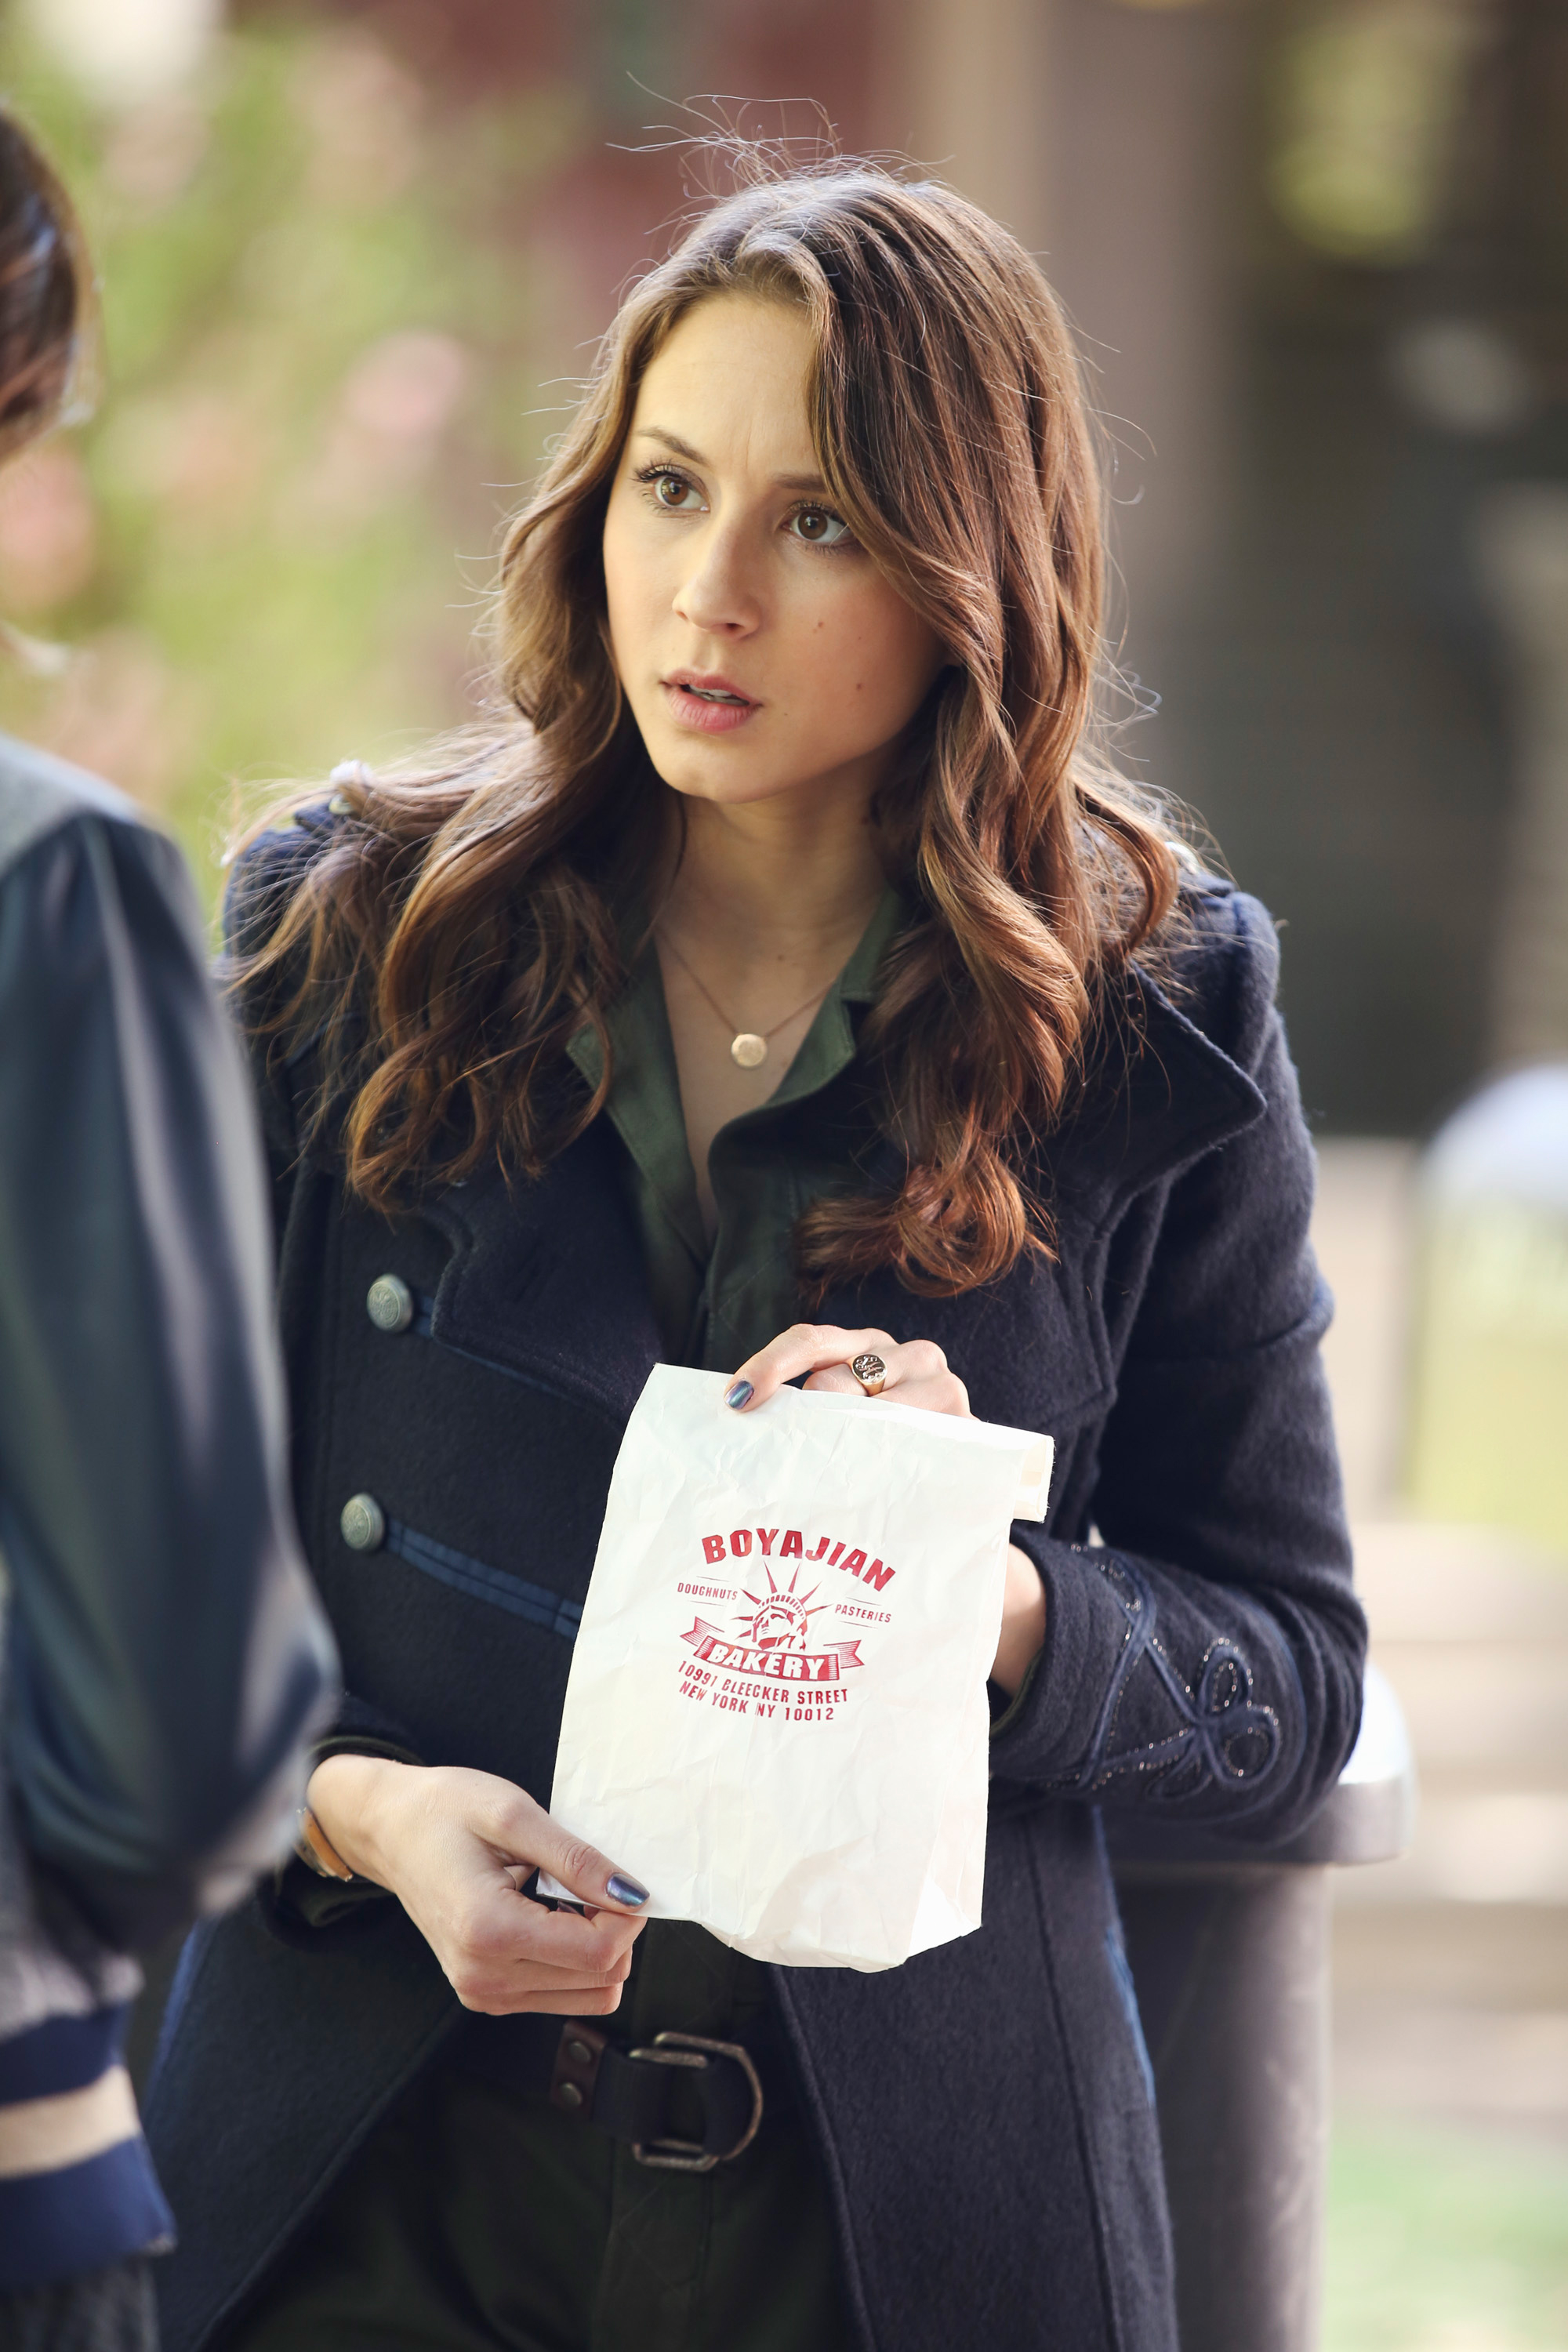 her character holding up a bakery bag